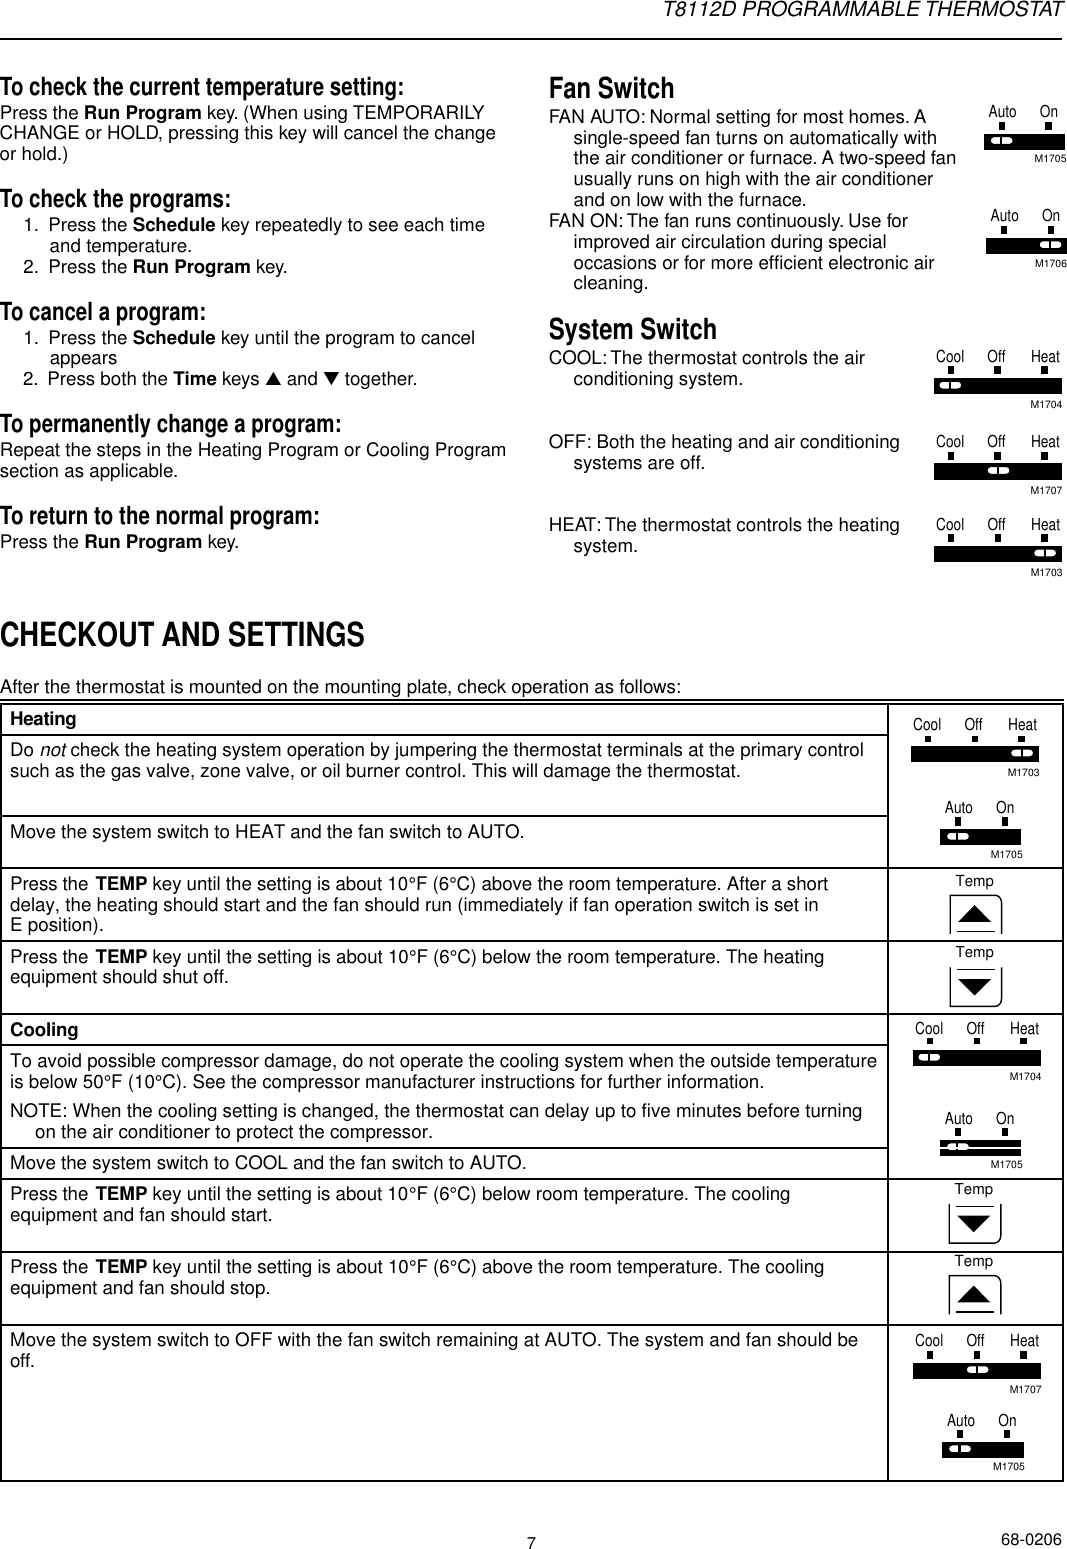 Page 7 of 8 - Honeywell Honeywell-Honeywell-Thermostat-T8112D-Users-Manual- 68-0170 - T8112 Programmable Thermostat  Honeywell-honeywell-thermostat-t8112d-users-manual